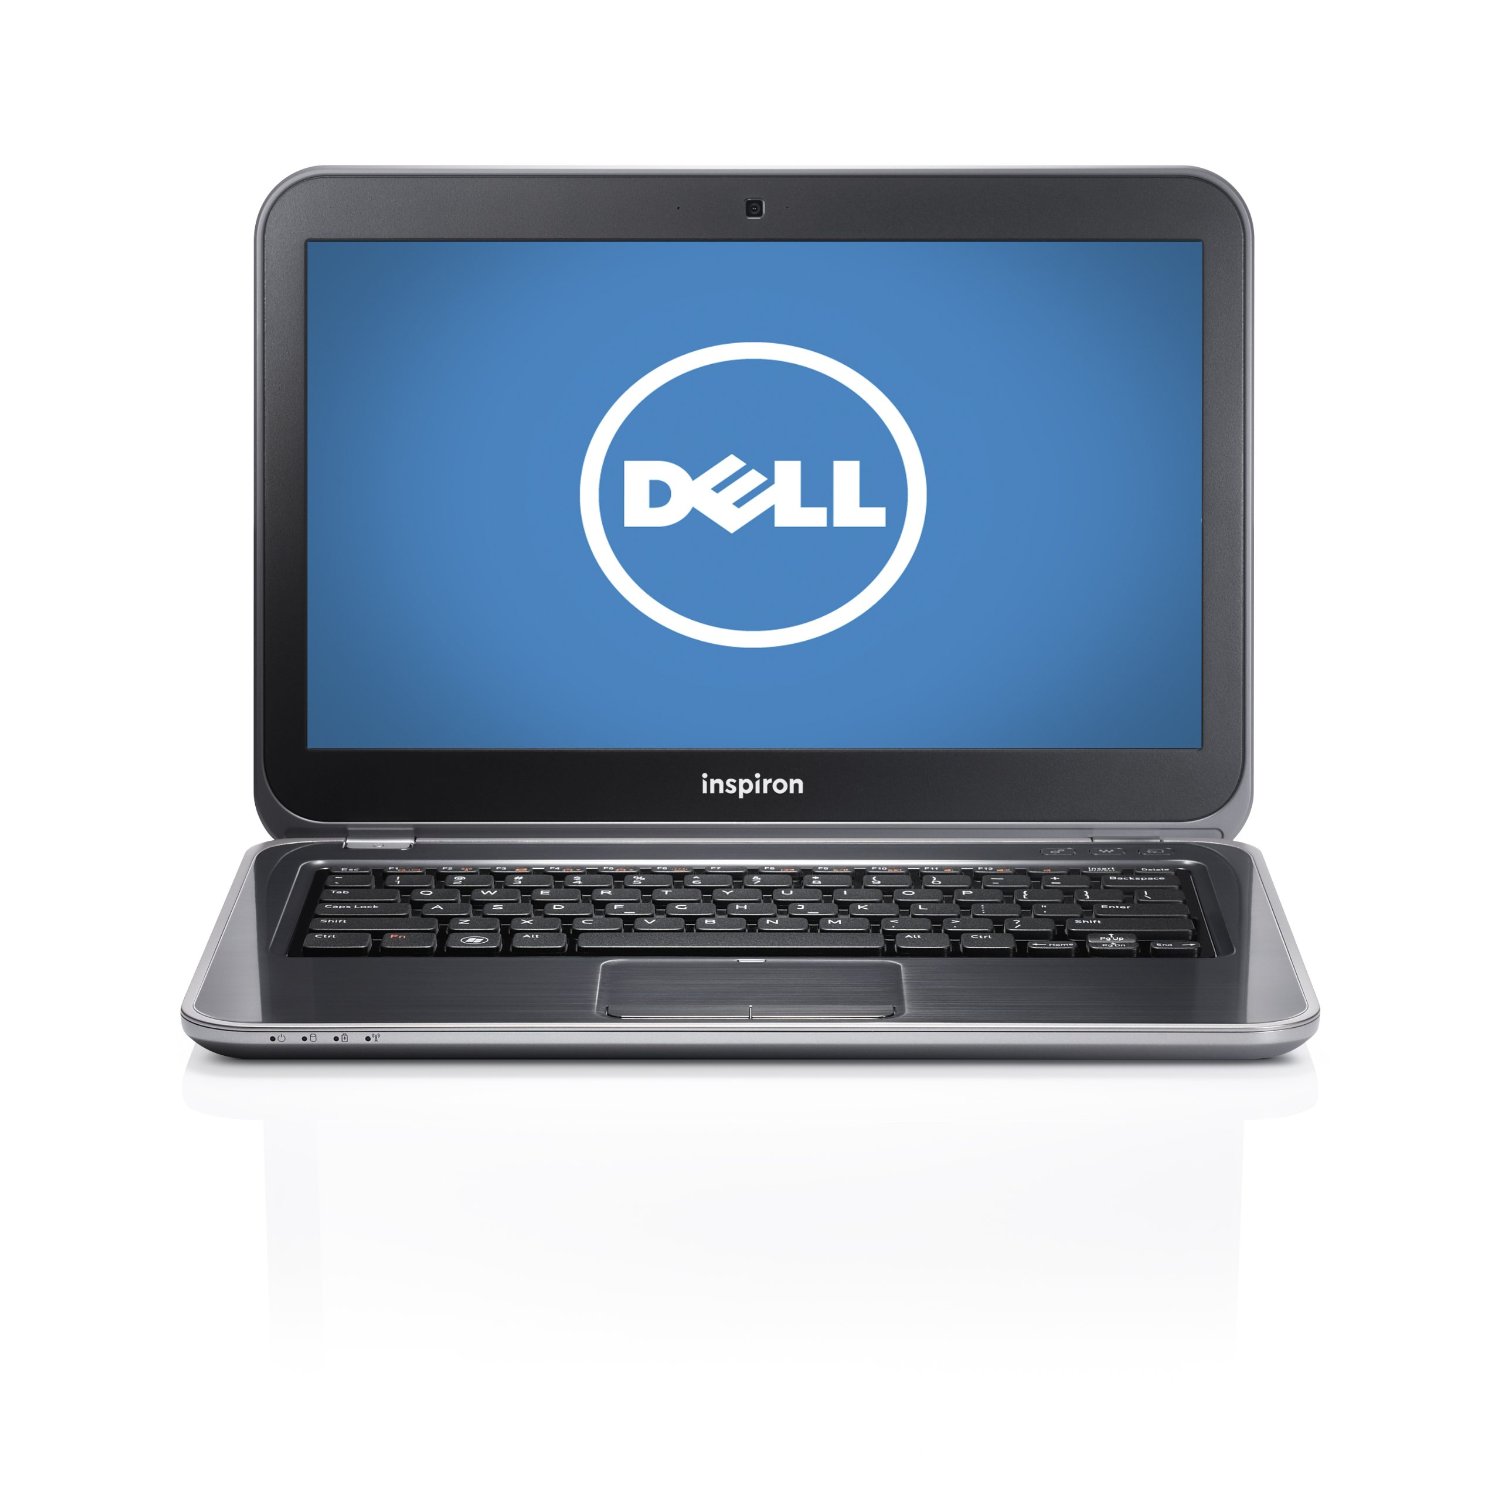 http://thetechjournal.com/wp-content/uploads/images/1210/1349897573-dell-inspiron-13z-13inch-laptop-2.jpg